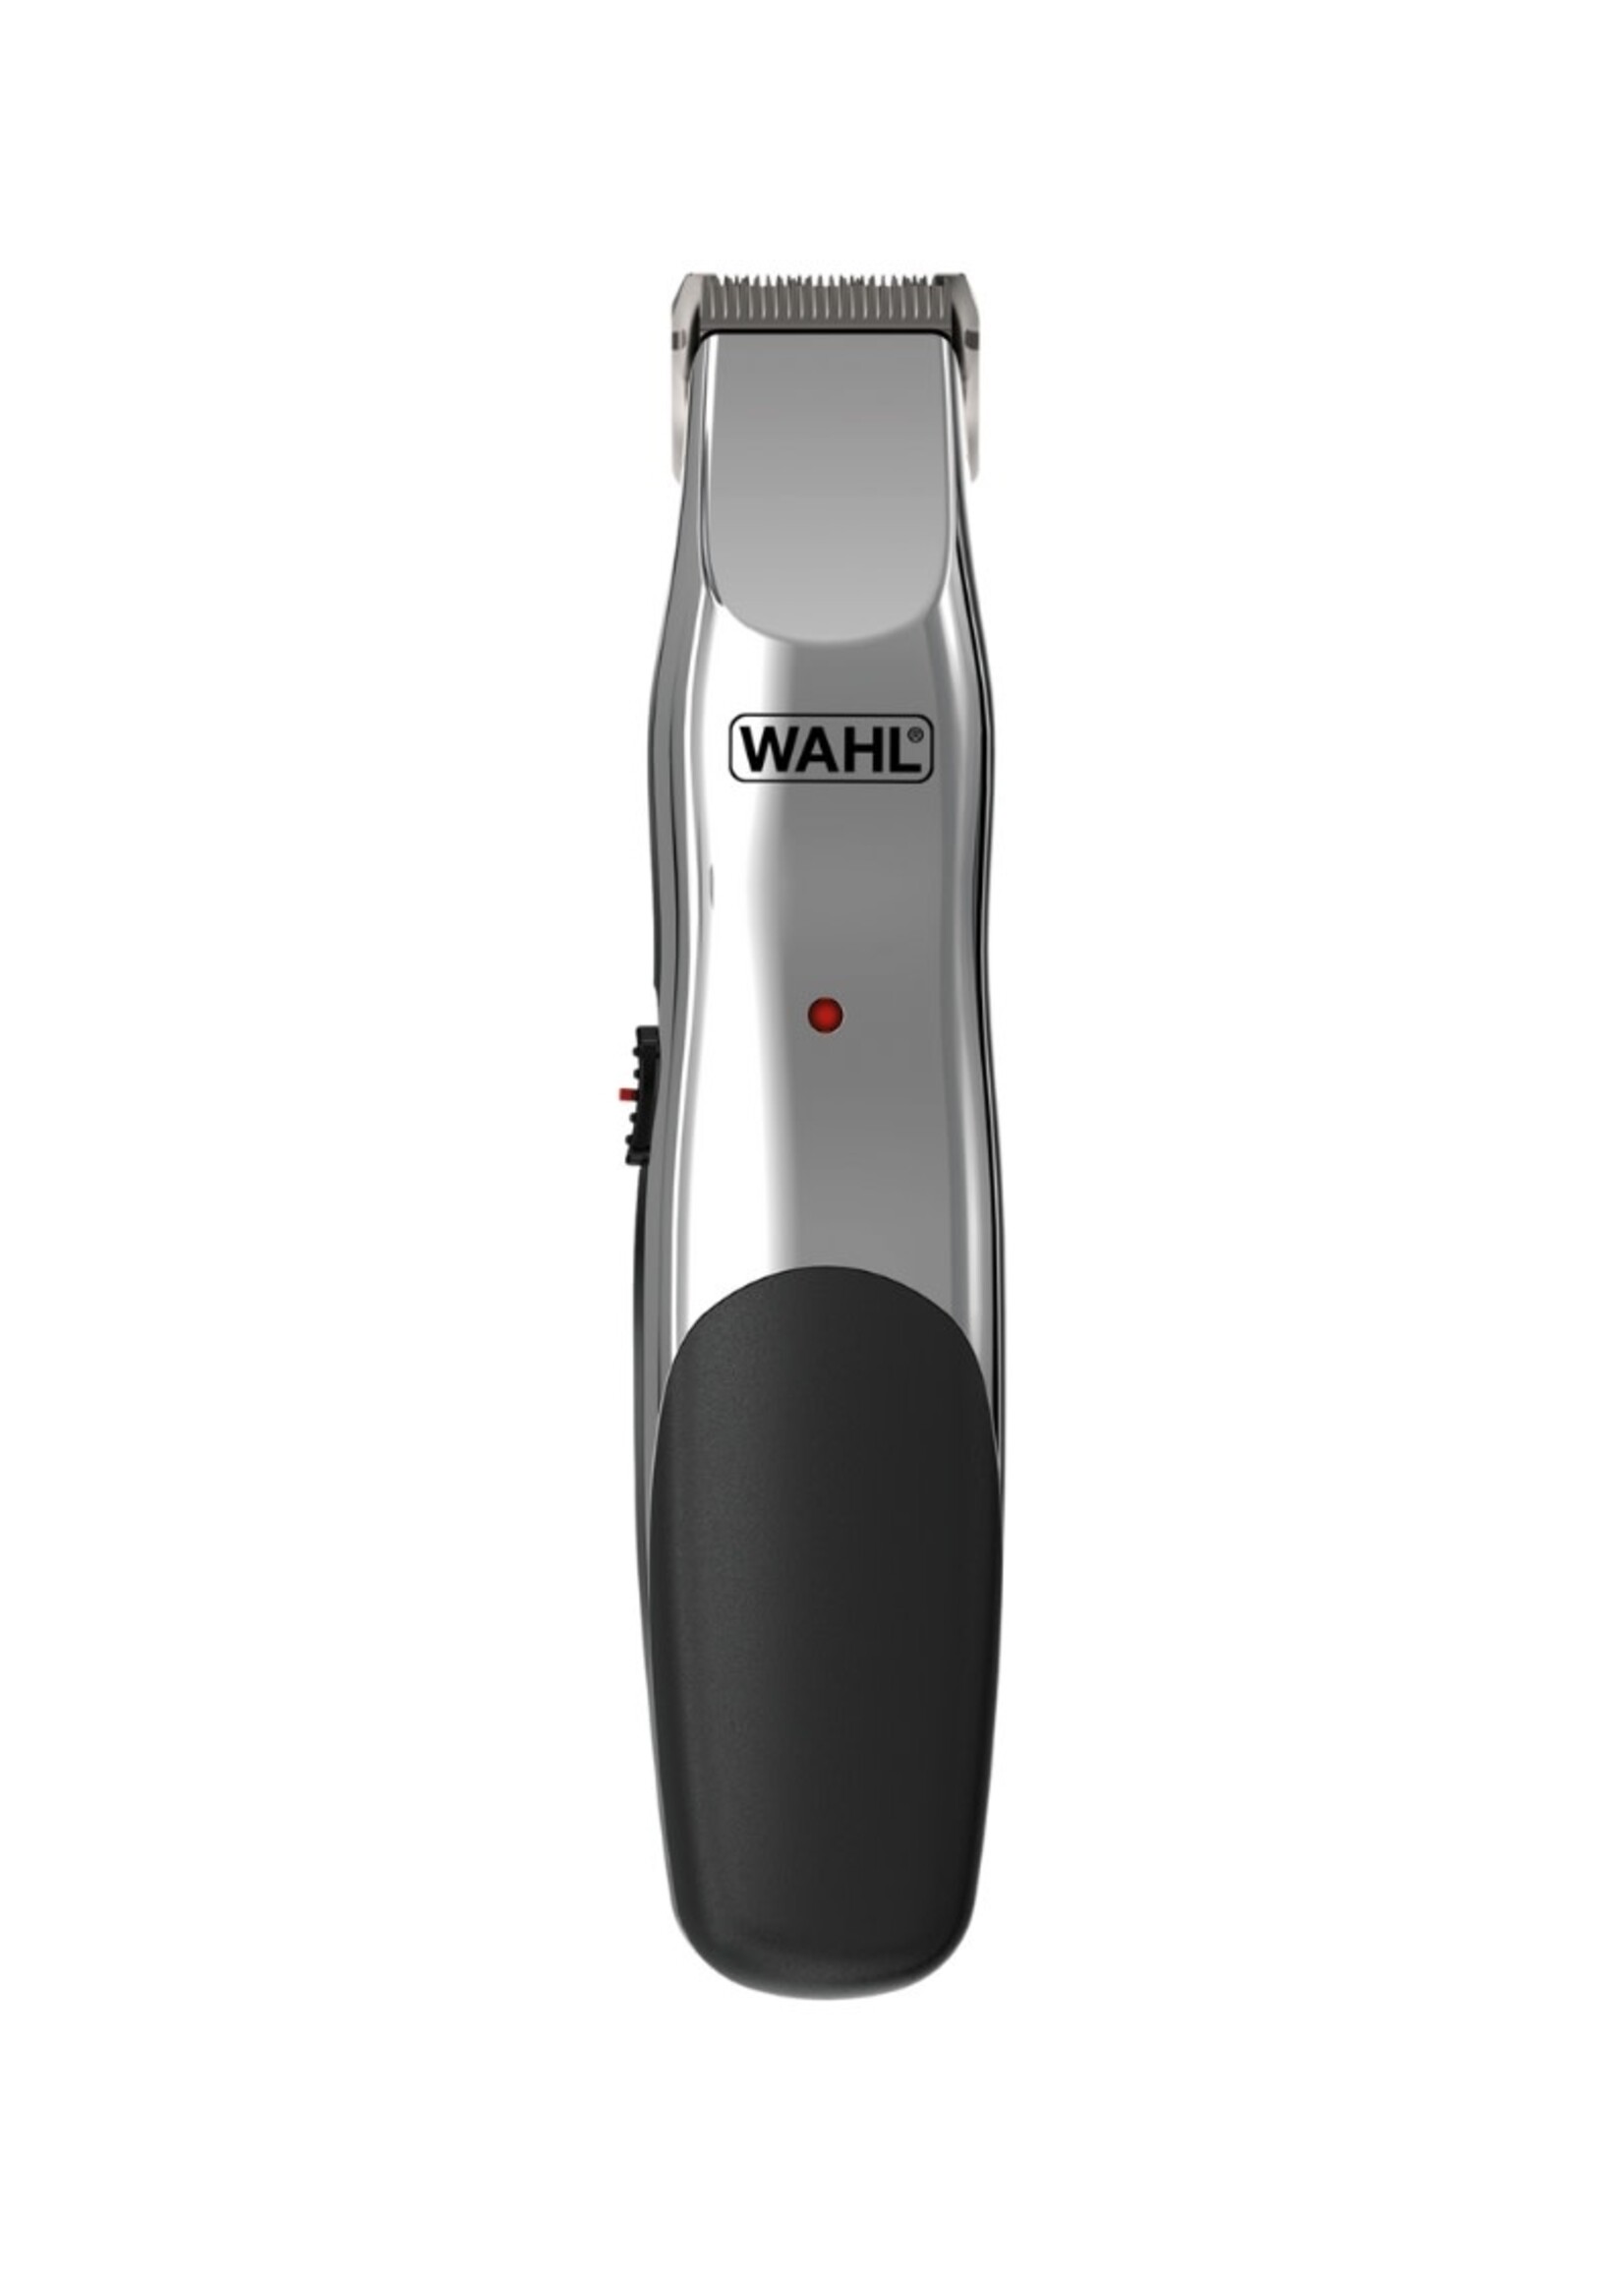 Wahl Home Wahl Beard & Stubble Rechargeable Trimmer